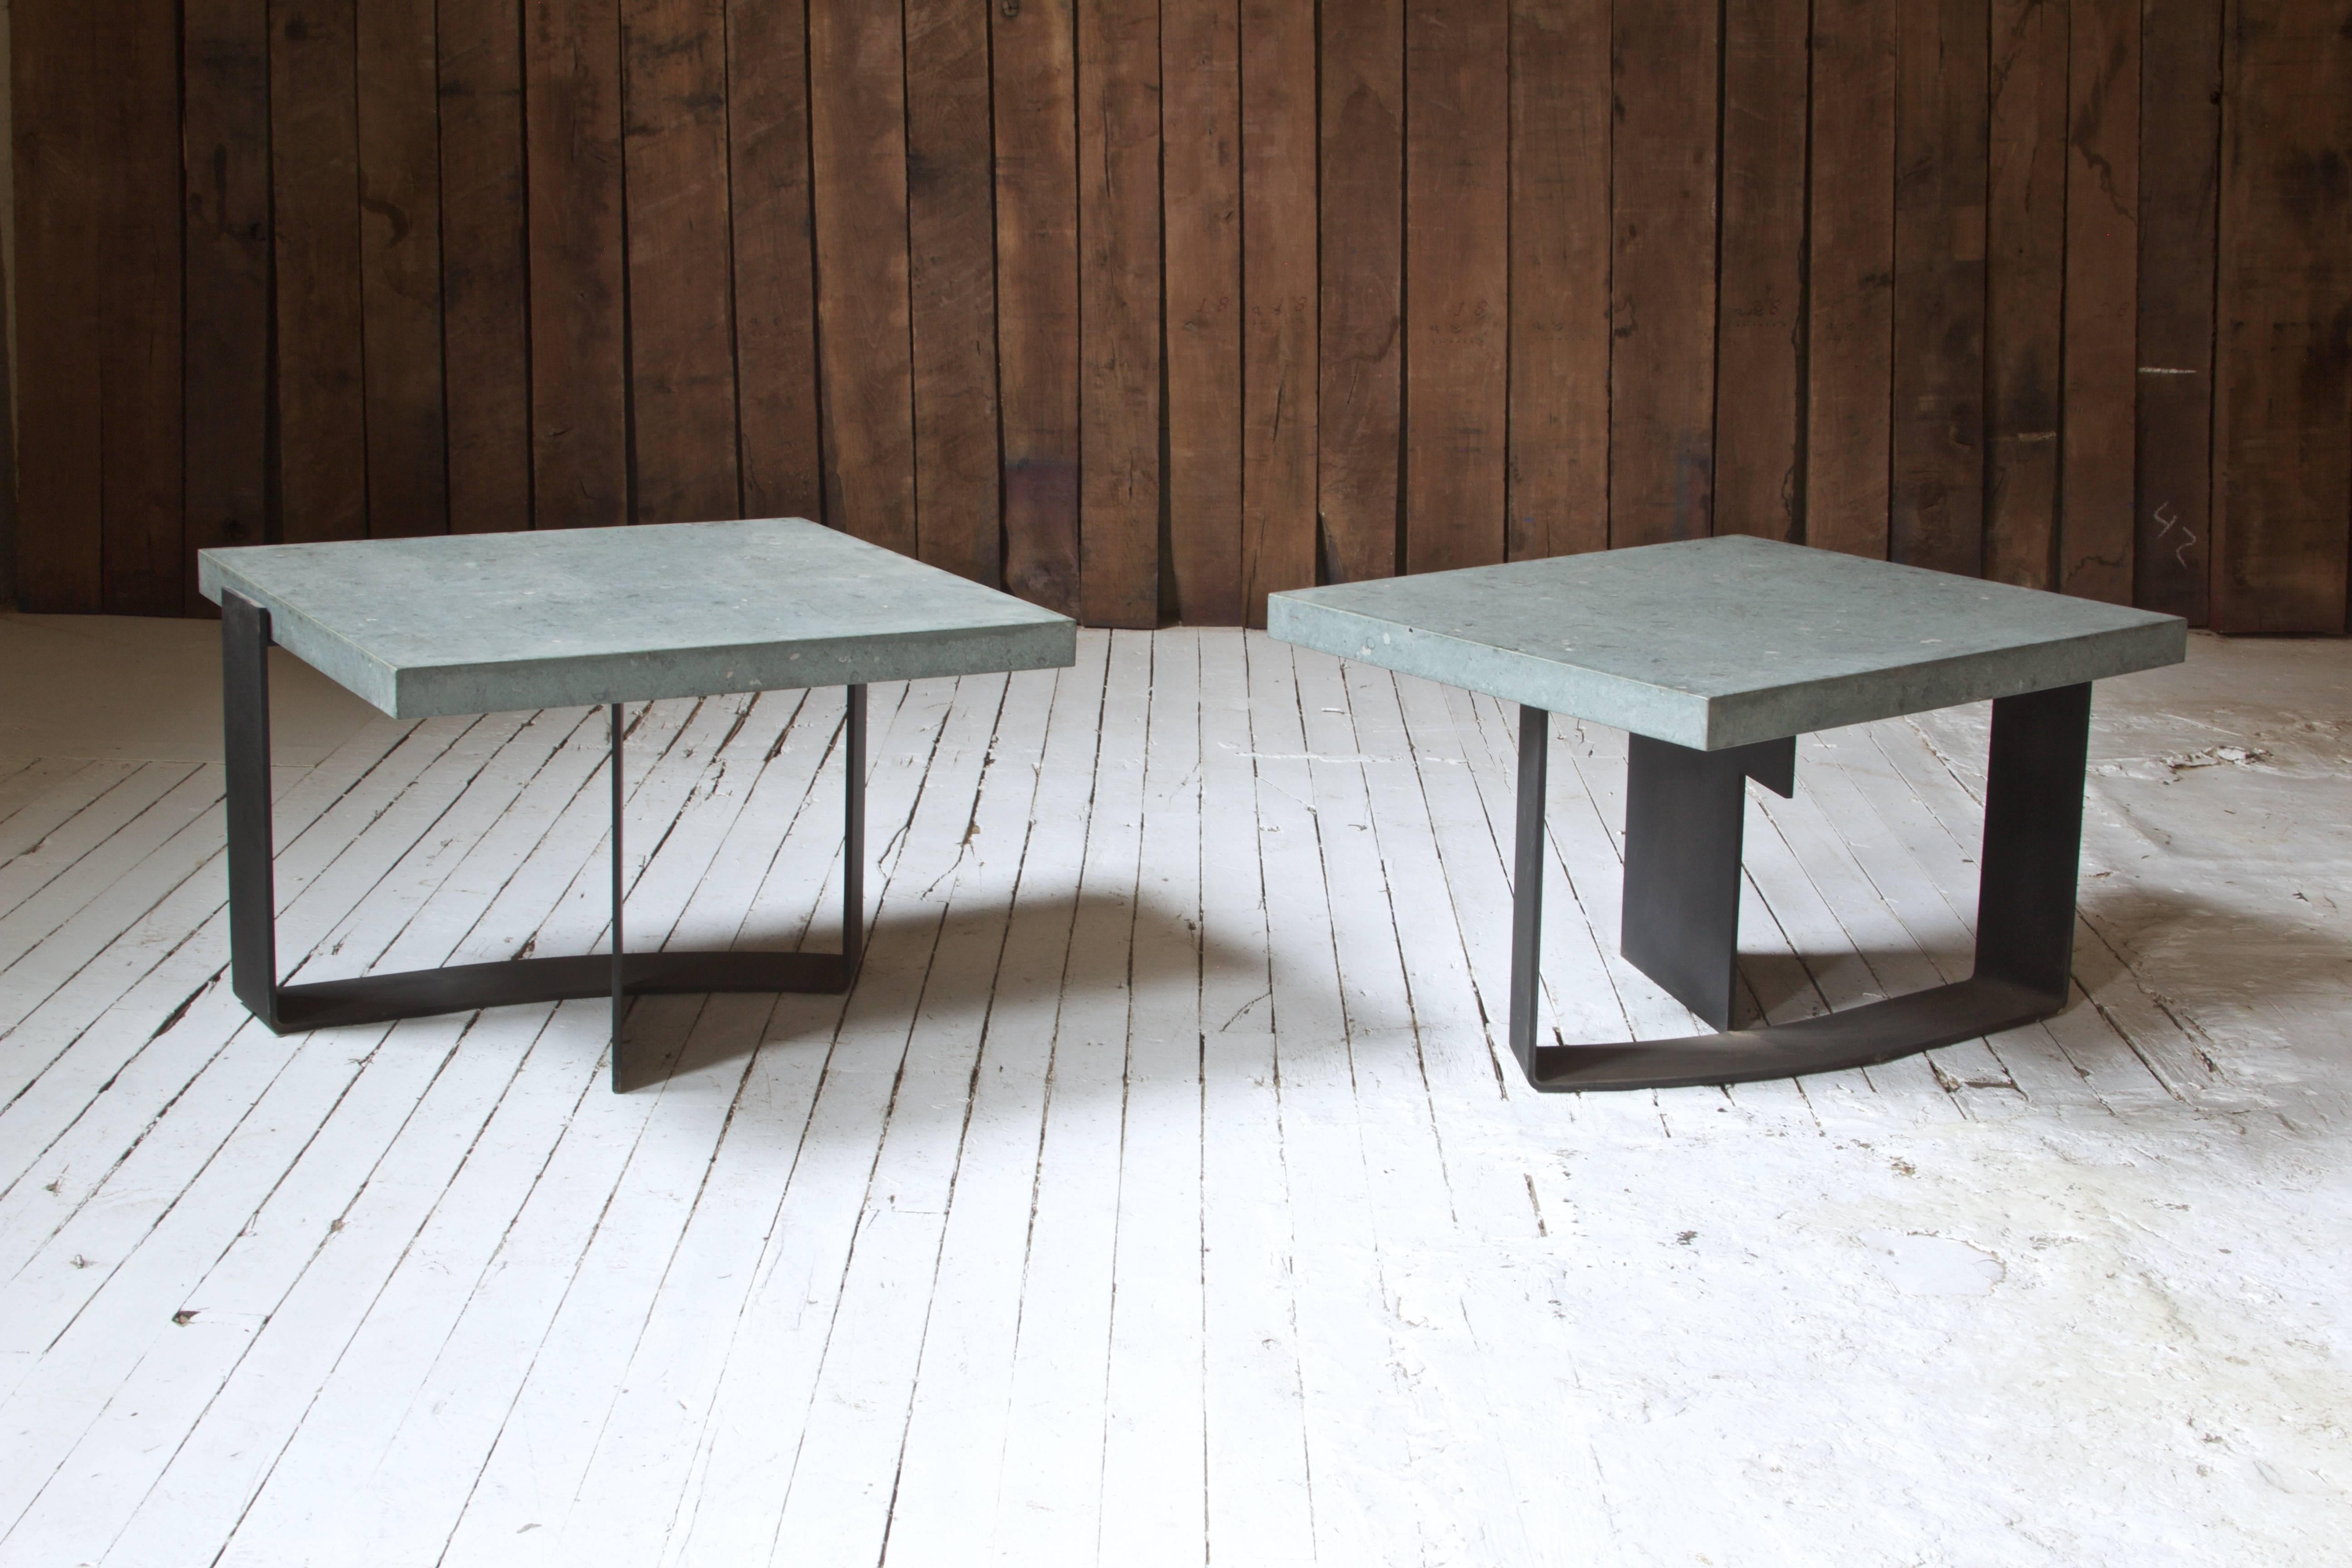 Great pair of fossiliferous limestone and enameled steel side tables; handmade in Italy, circa 1975. A simple yet dynamic design, the base's unique shape allows the table's appearance to change with new perspectives--negative and positive space